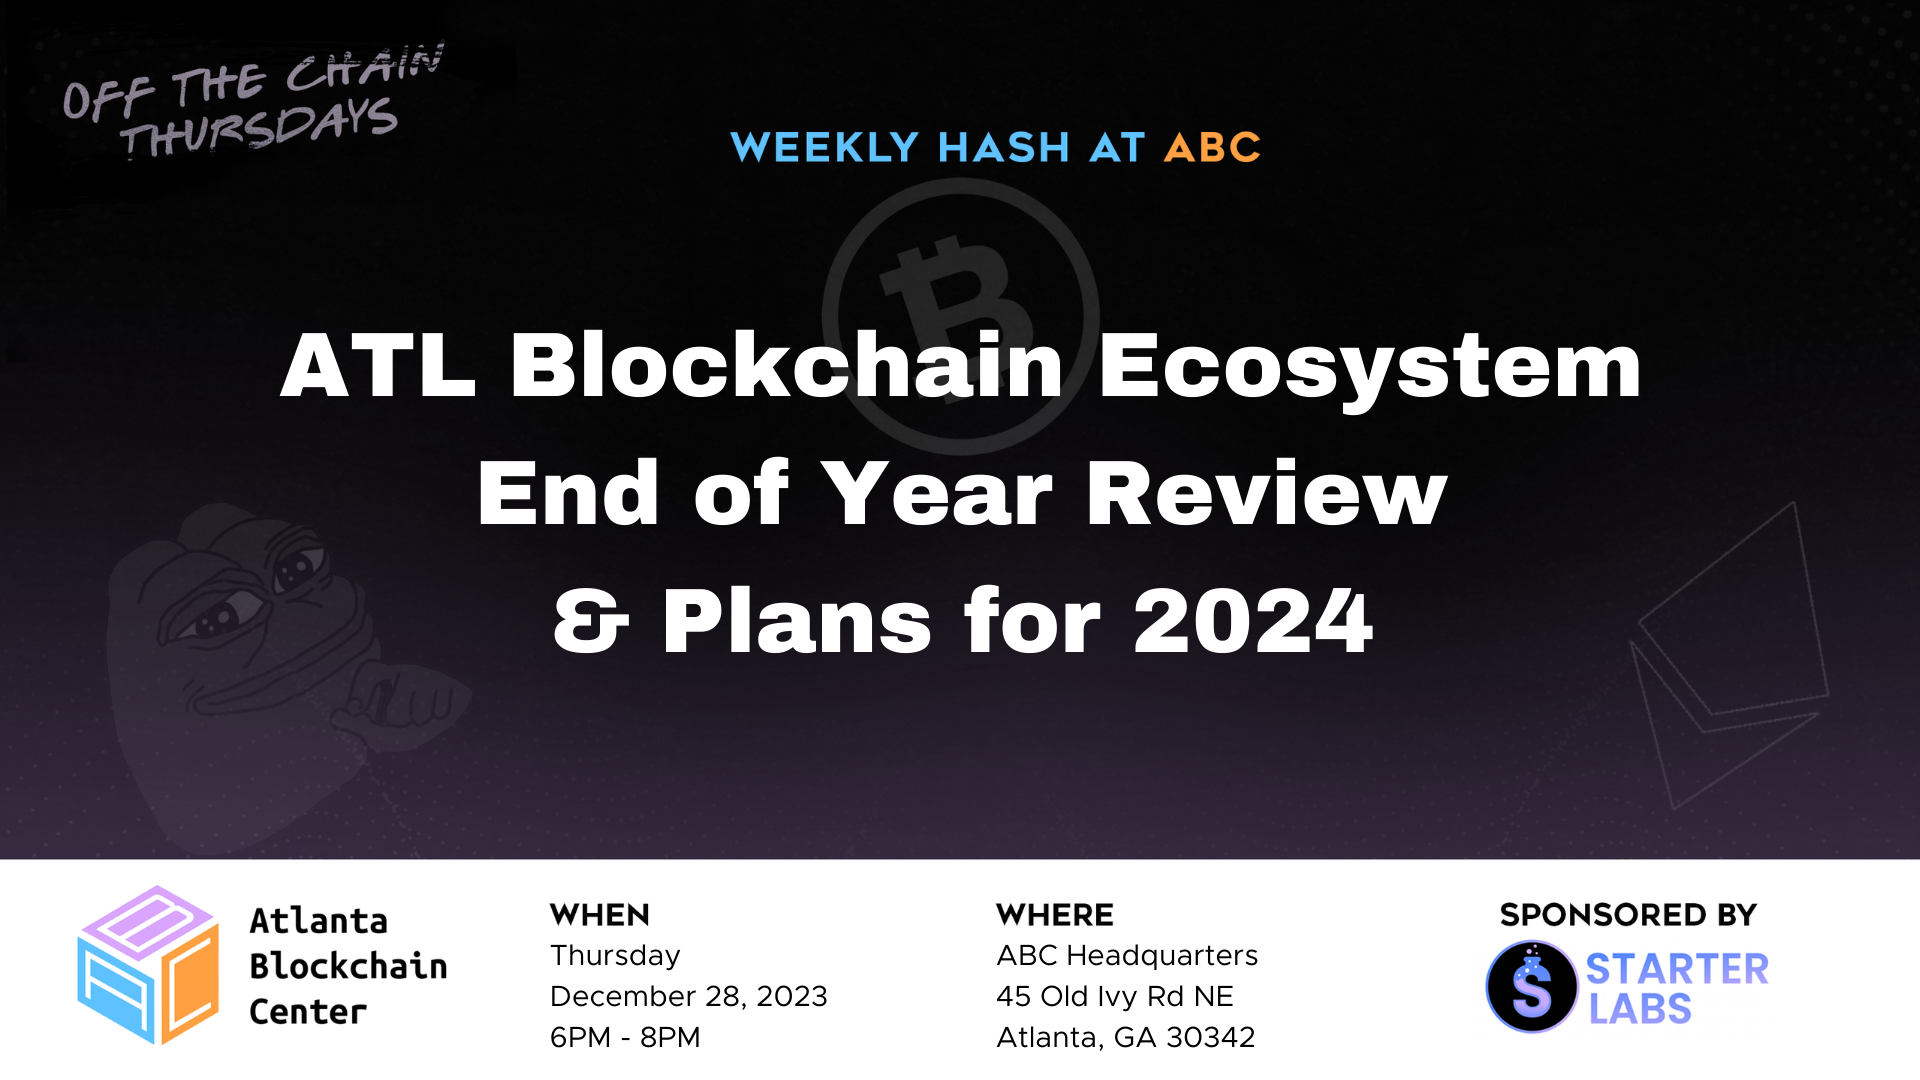 Weekly Hash @ ABC: ATL Blockchain Ecosystem End of Year Review & 2024 Plans